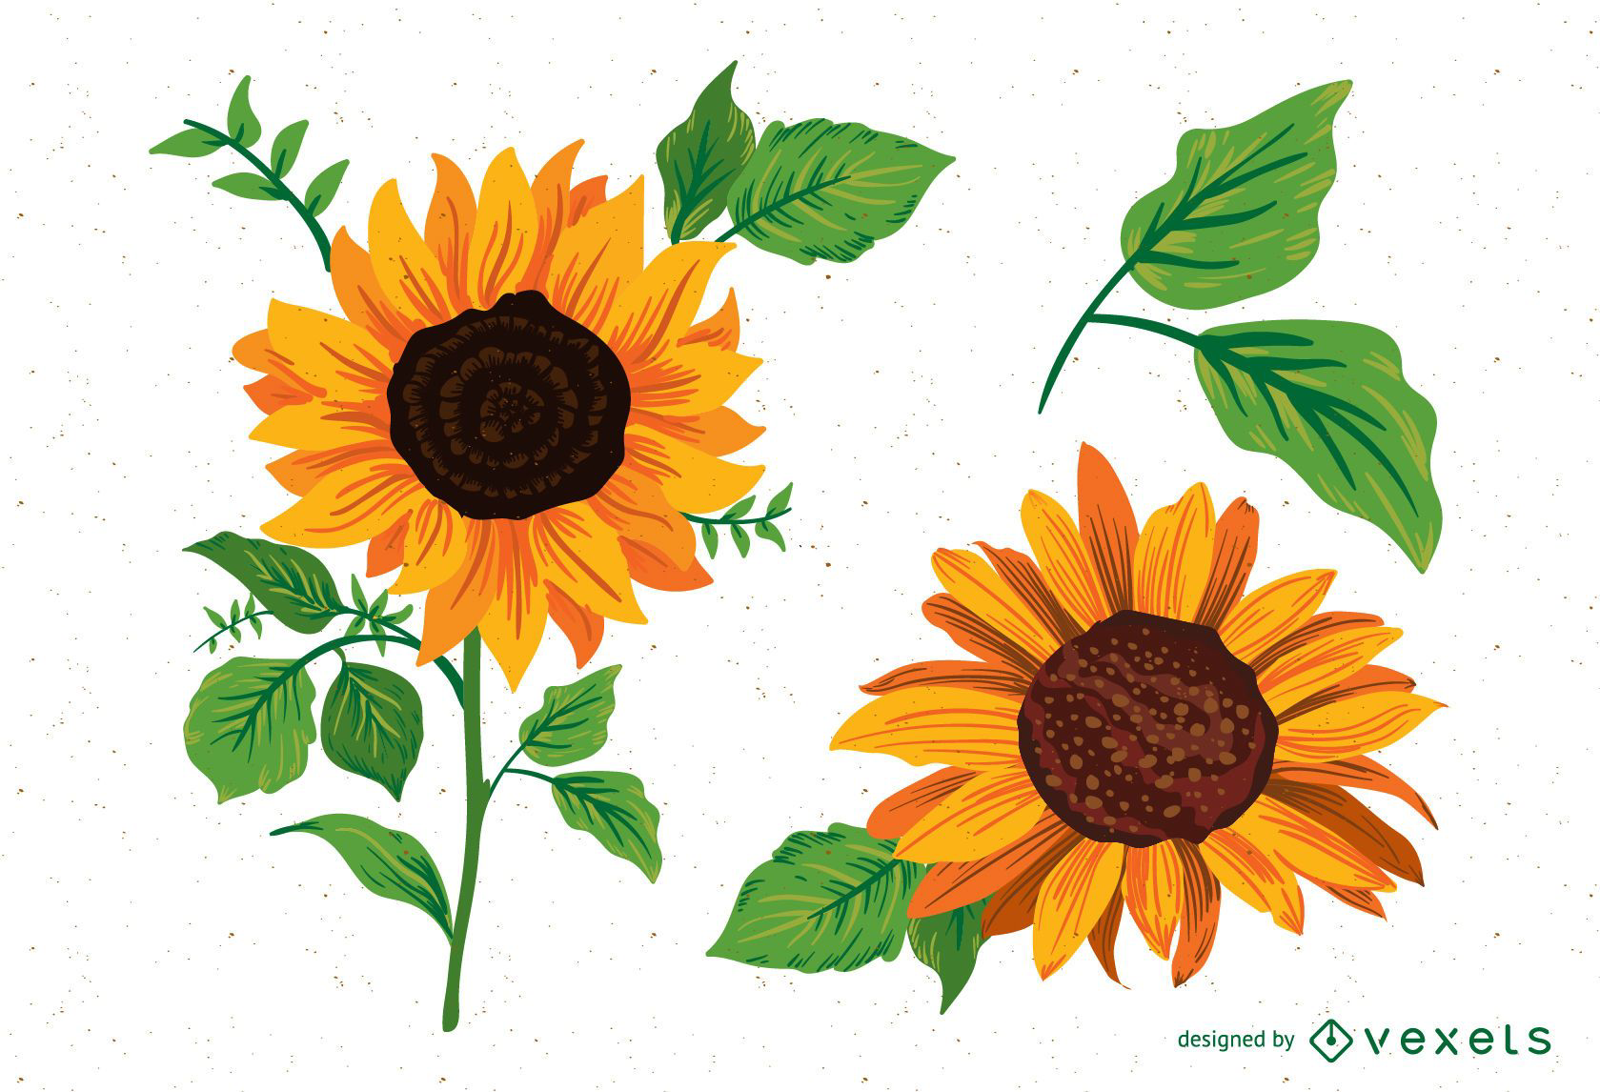 Sunflower with Leaf vector